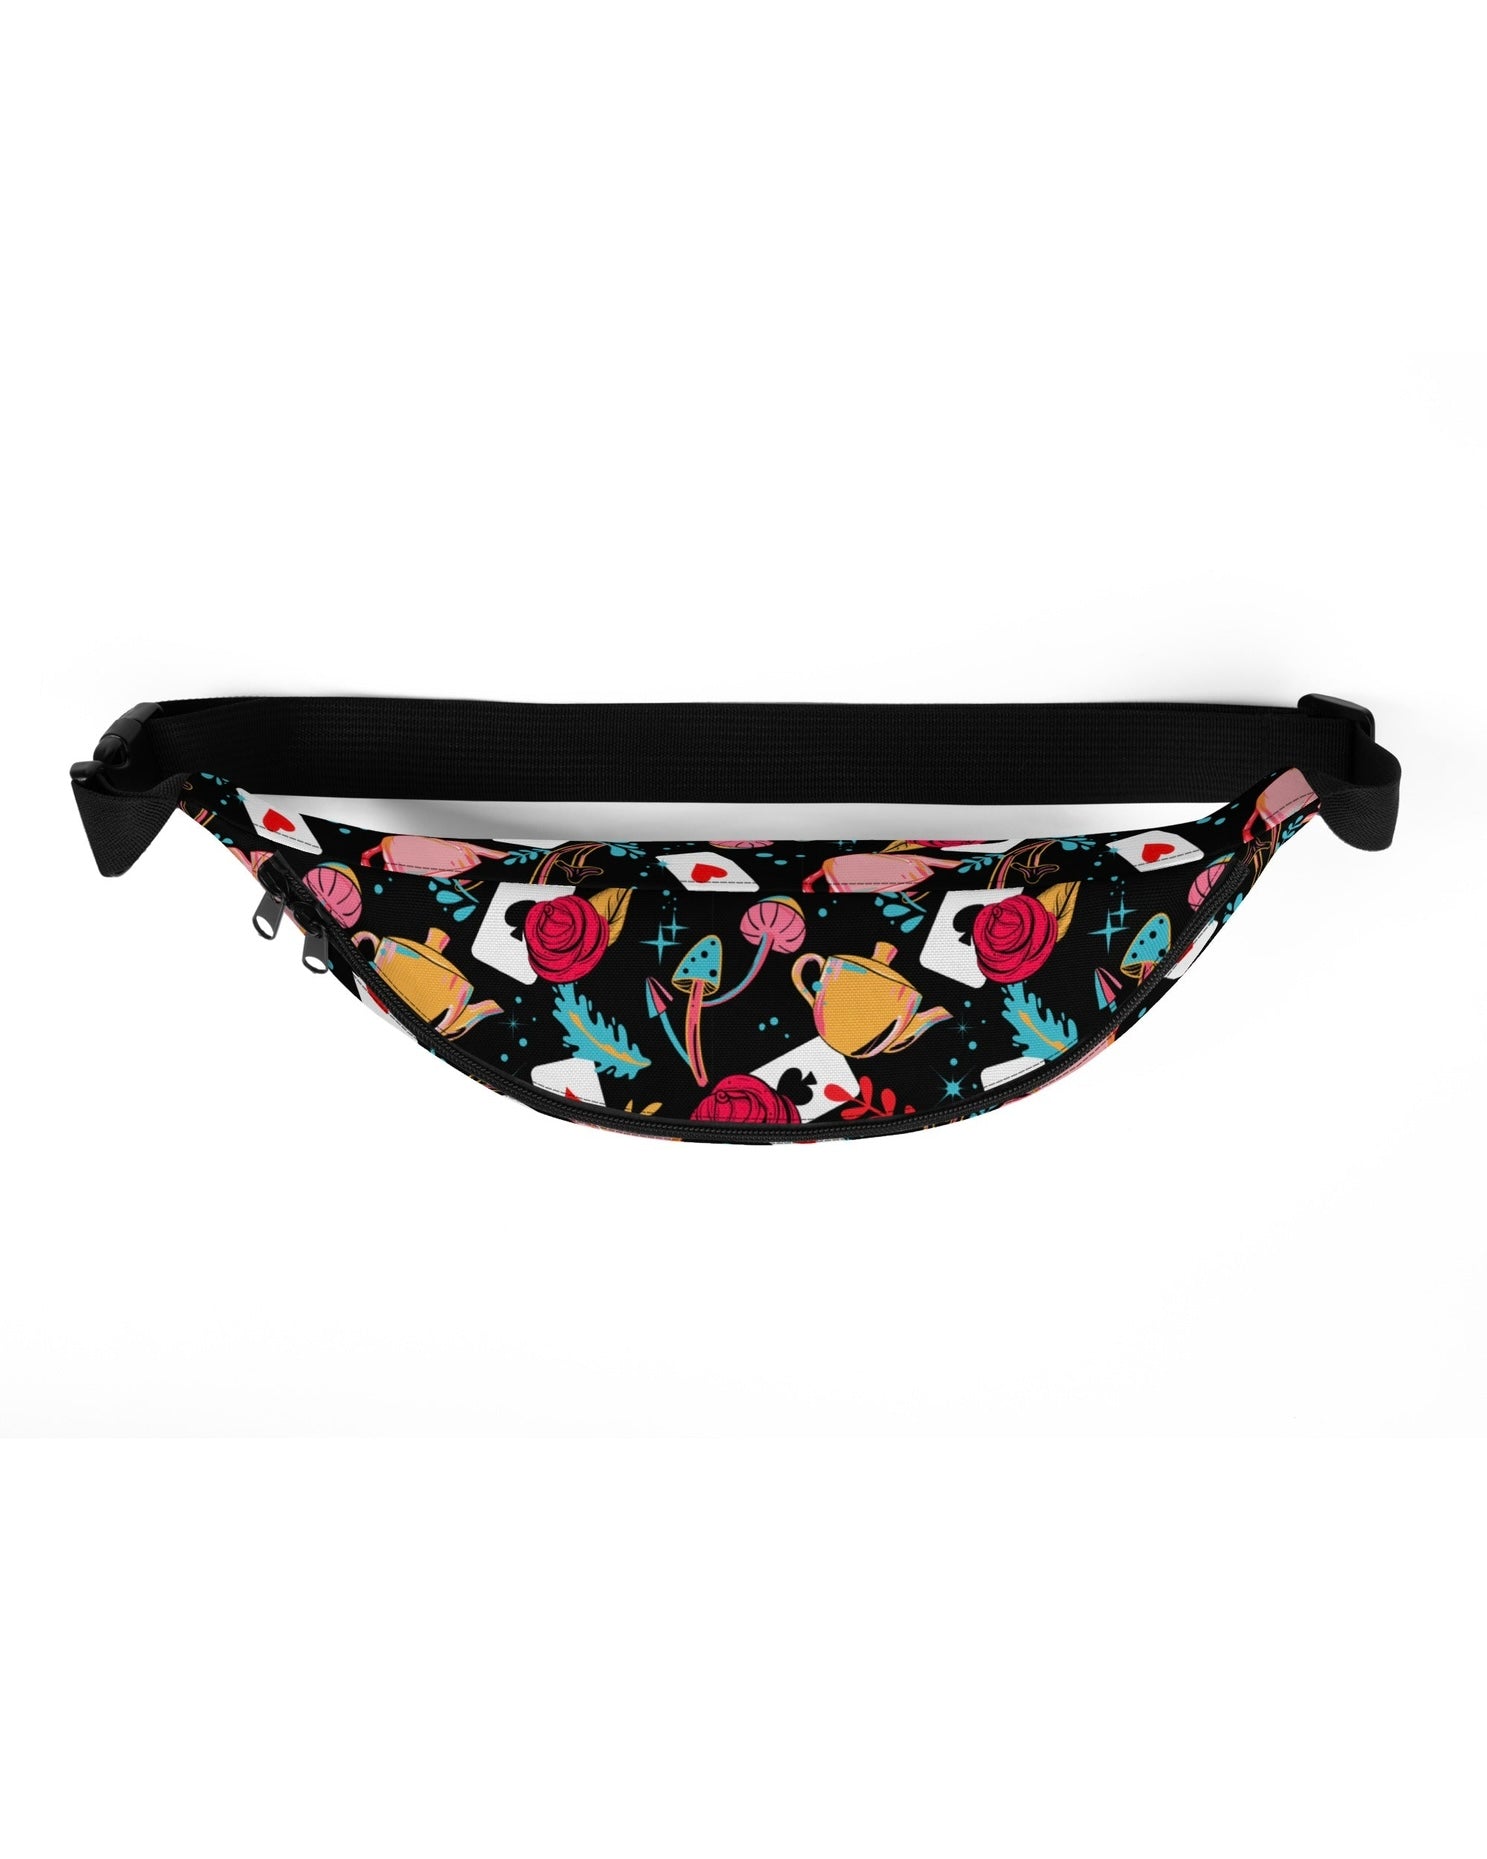 Curiouser and Curiouser Fanny Pack, Fanny Pack, - One Stop Rave